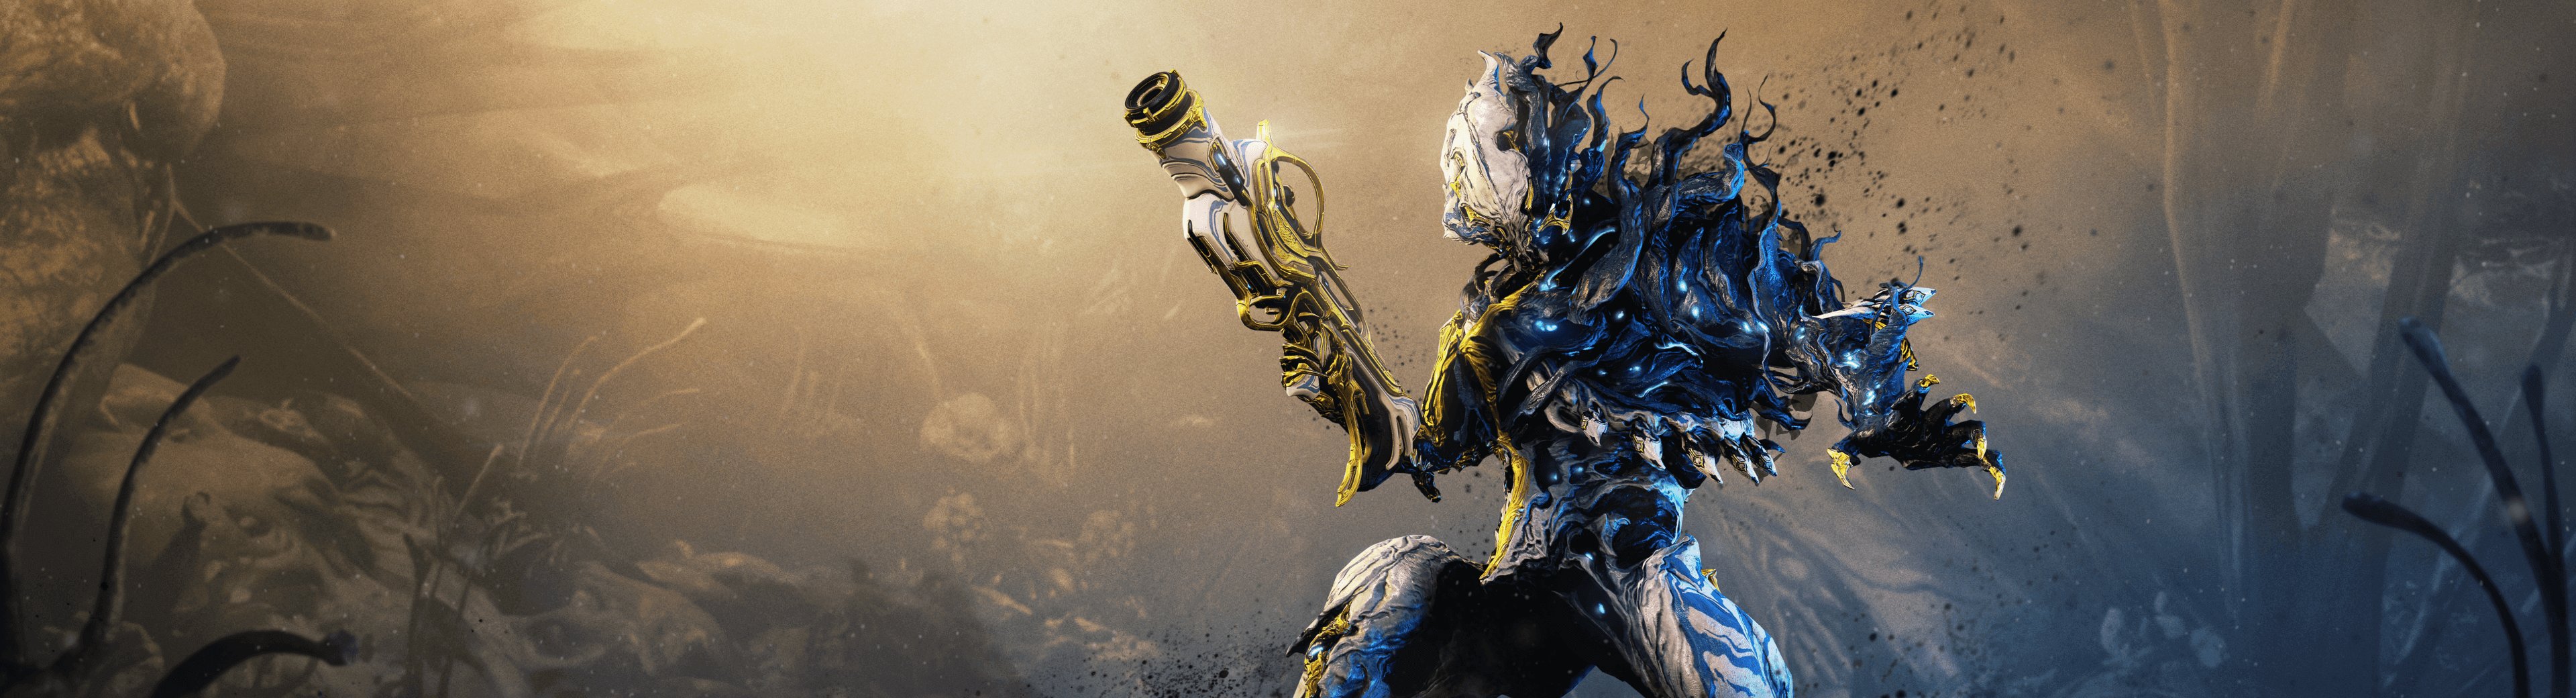 NIDUS PRIME AVAILABLE TODAY